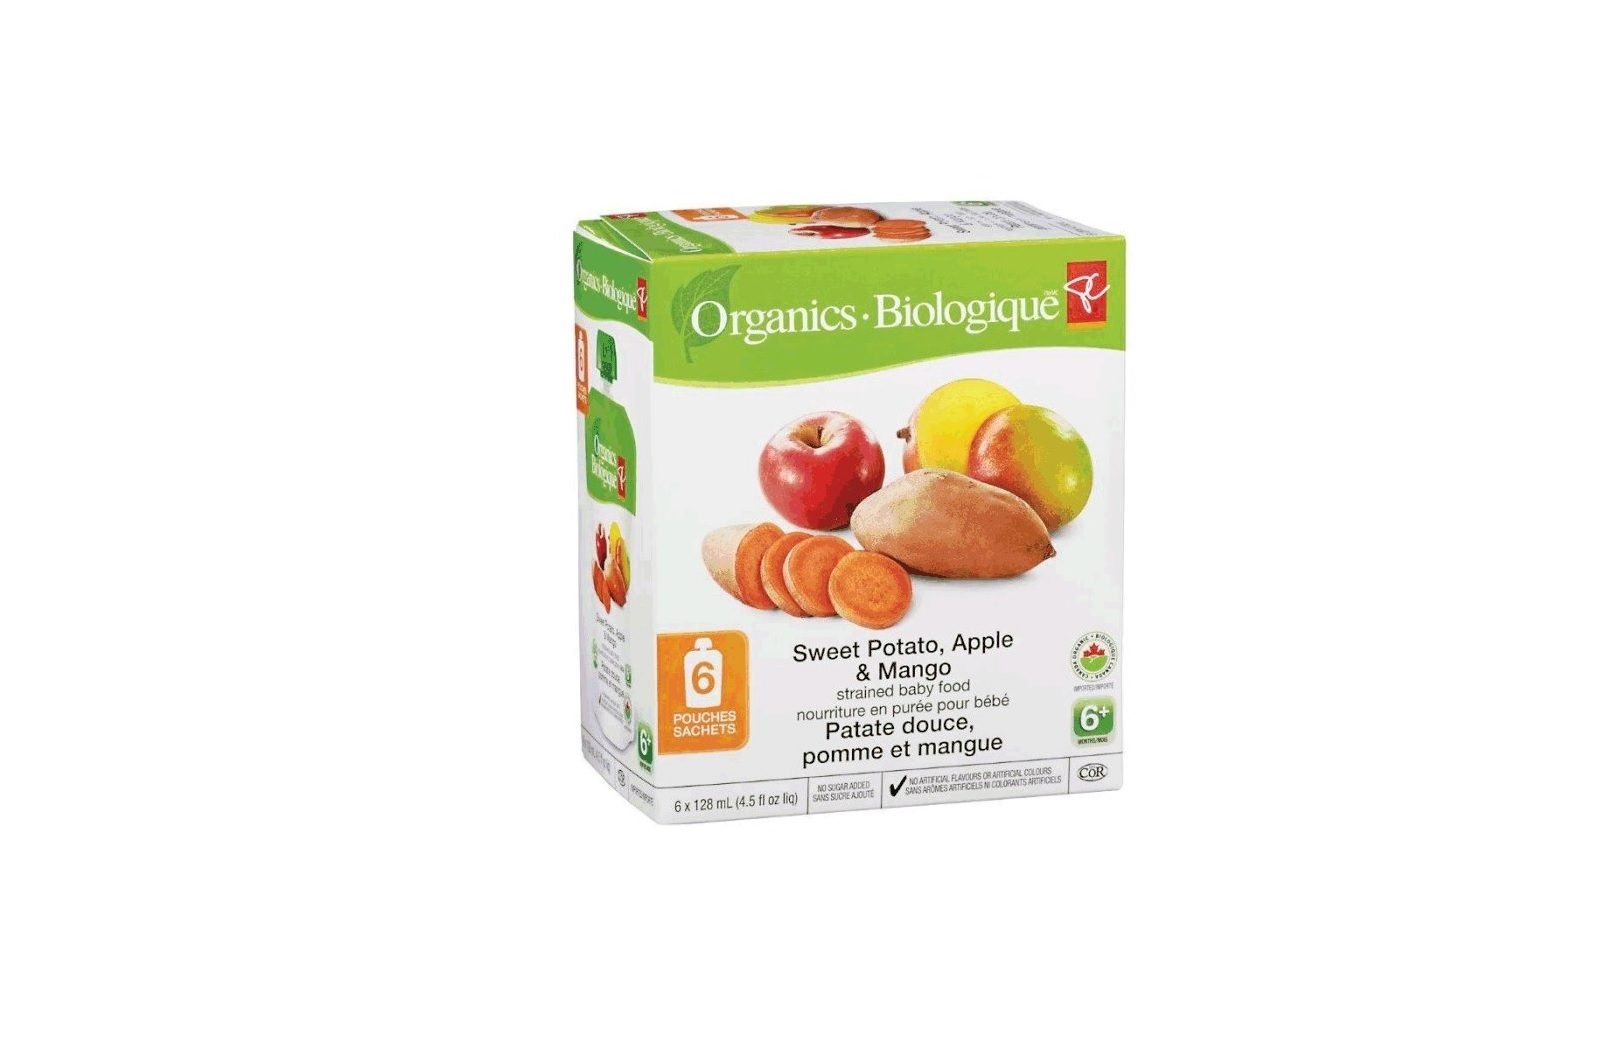 Baby food recall expanded